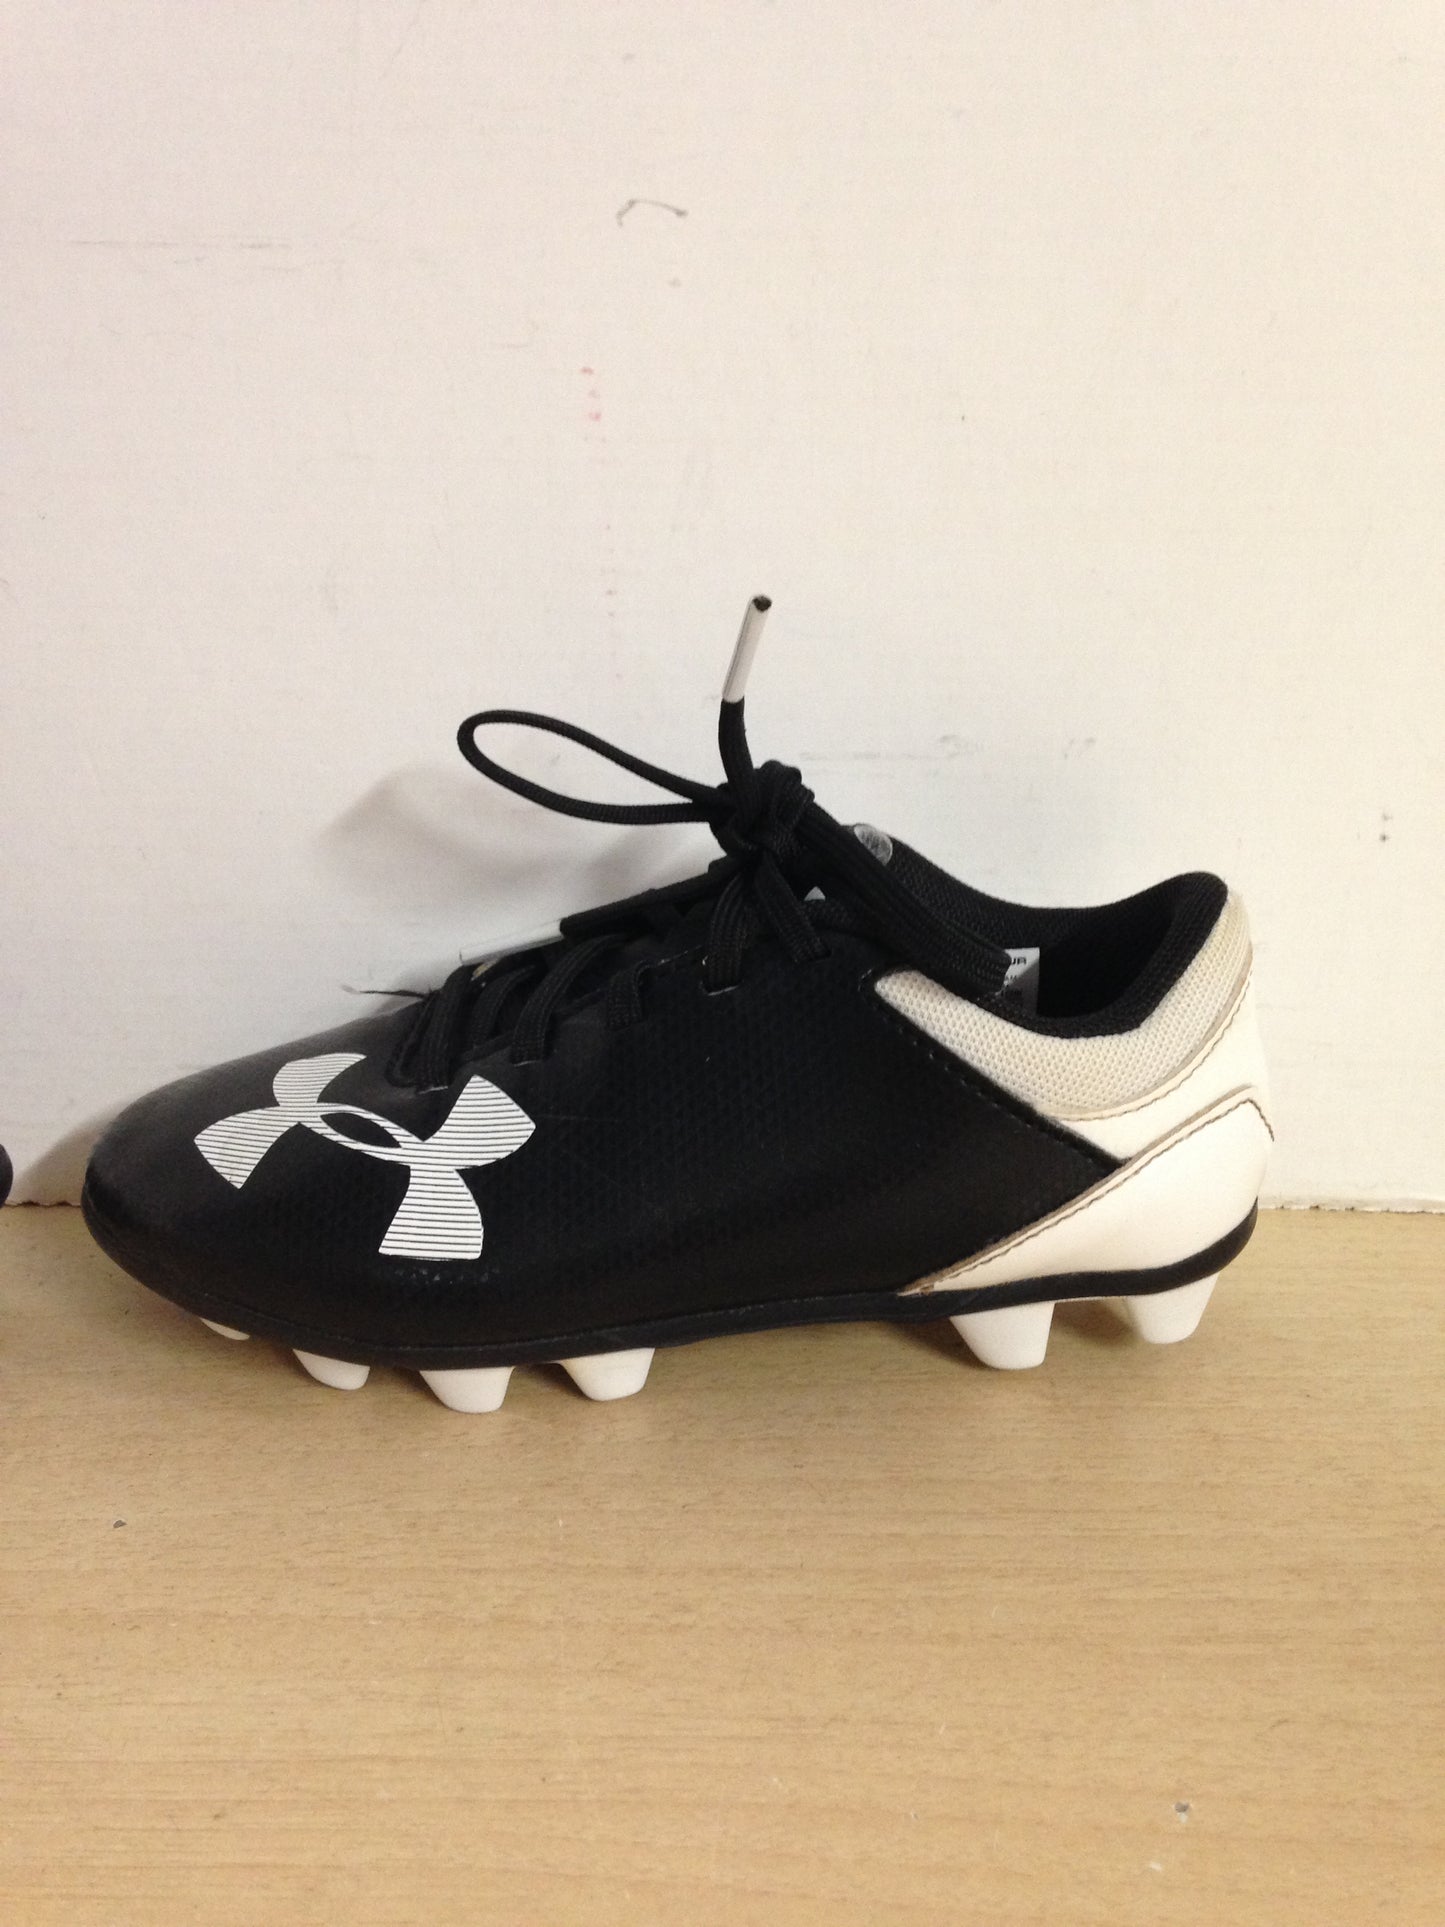 Soccer Shoes Cleats Child Size 11 Under Armor Black White